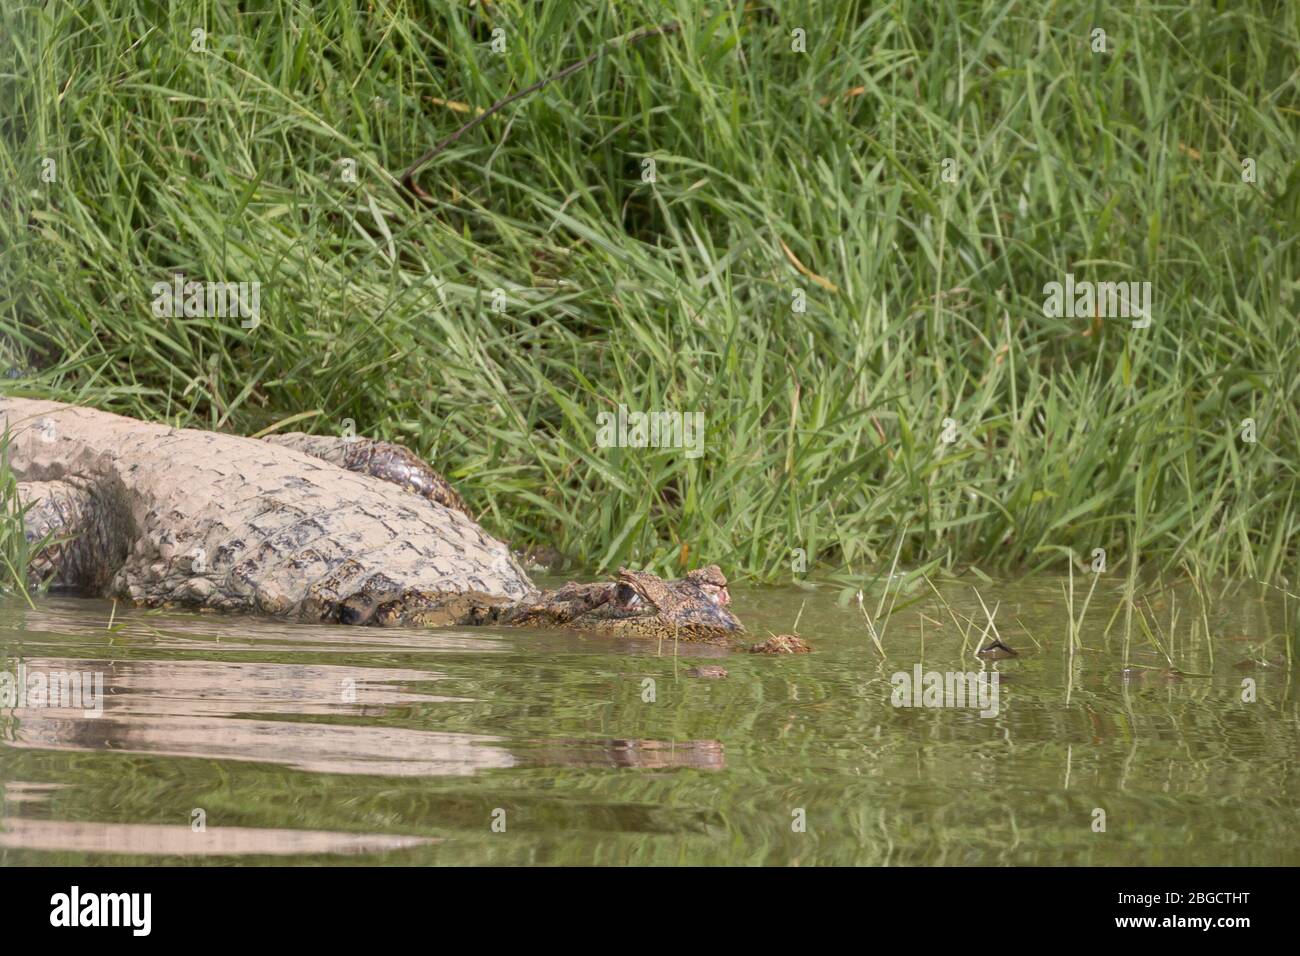 Spectacled caiman (Caiman crocodilus) submerging from a river bank. Amazon rainforest, Brazil. Stock Photo